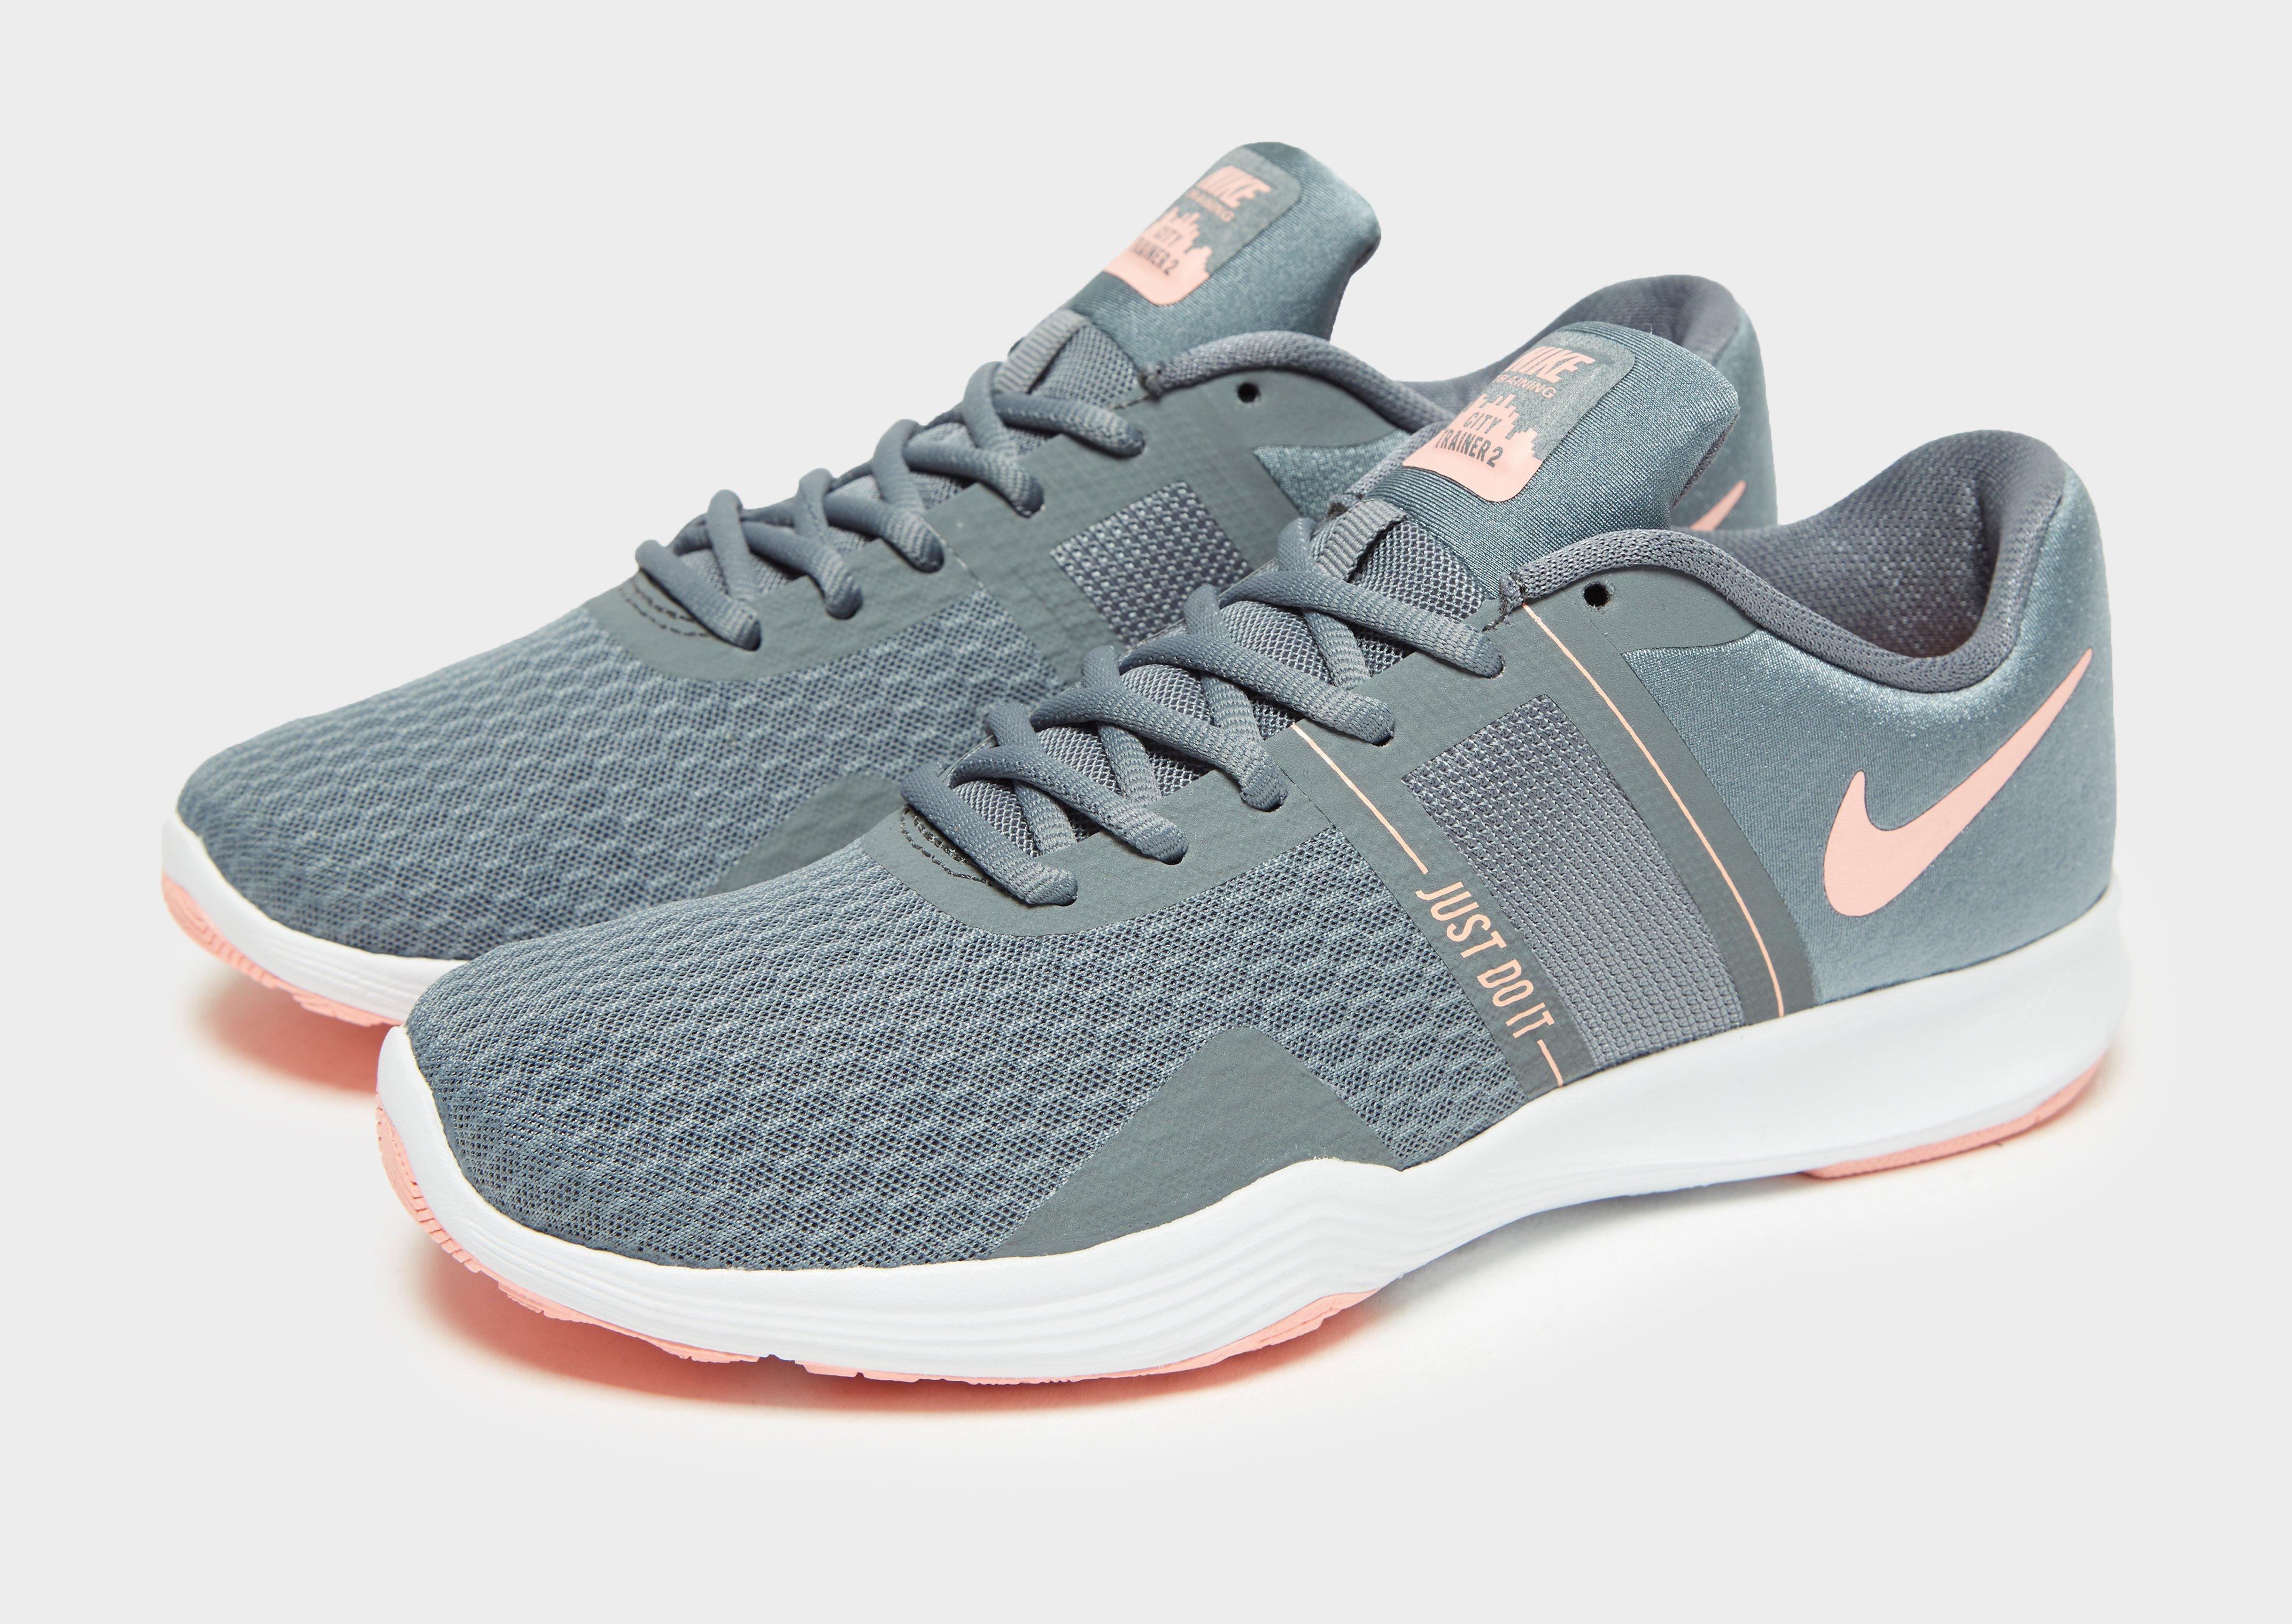 Nike Synthetic City Trainer 2 in Grey 